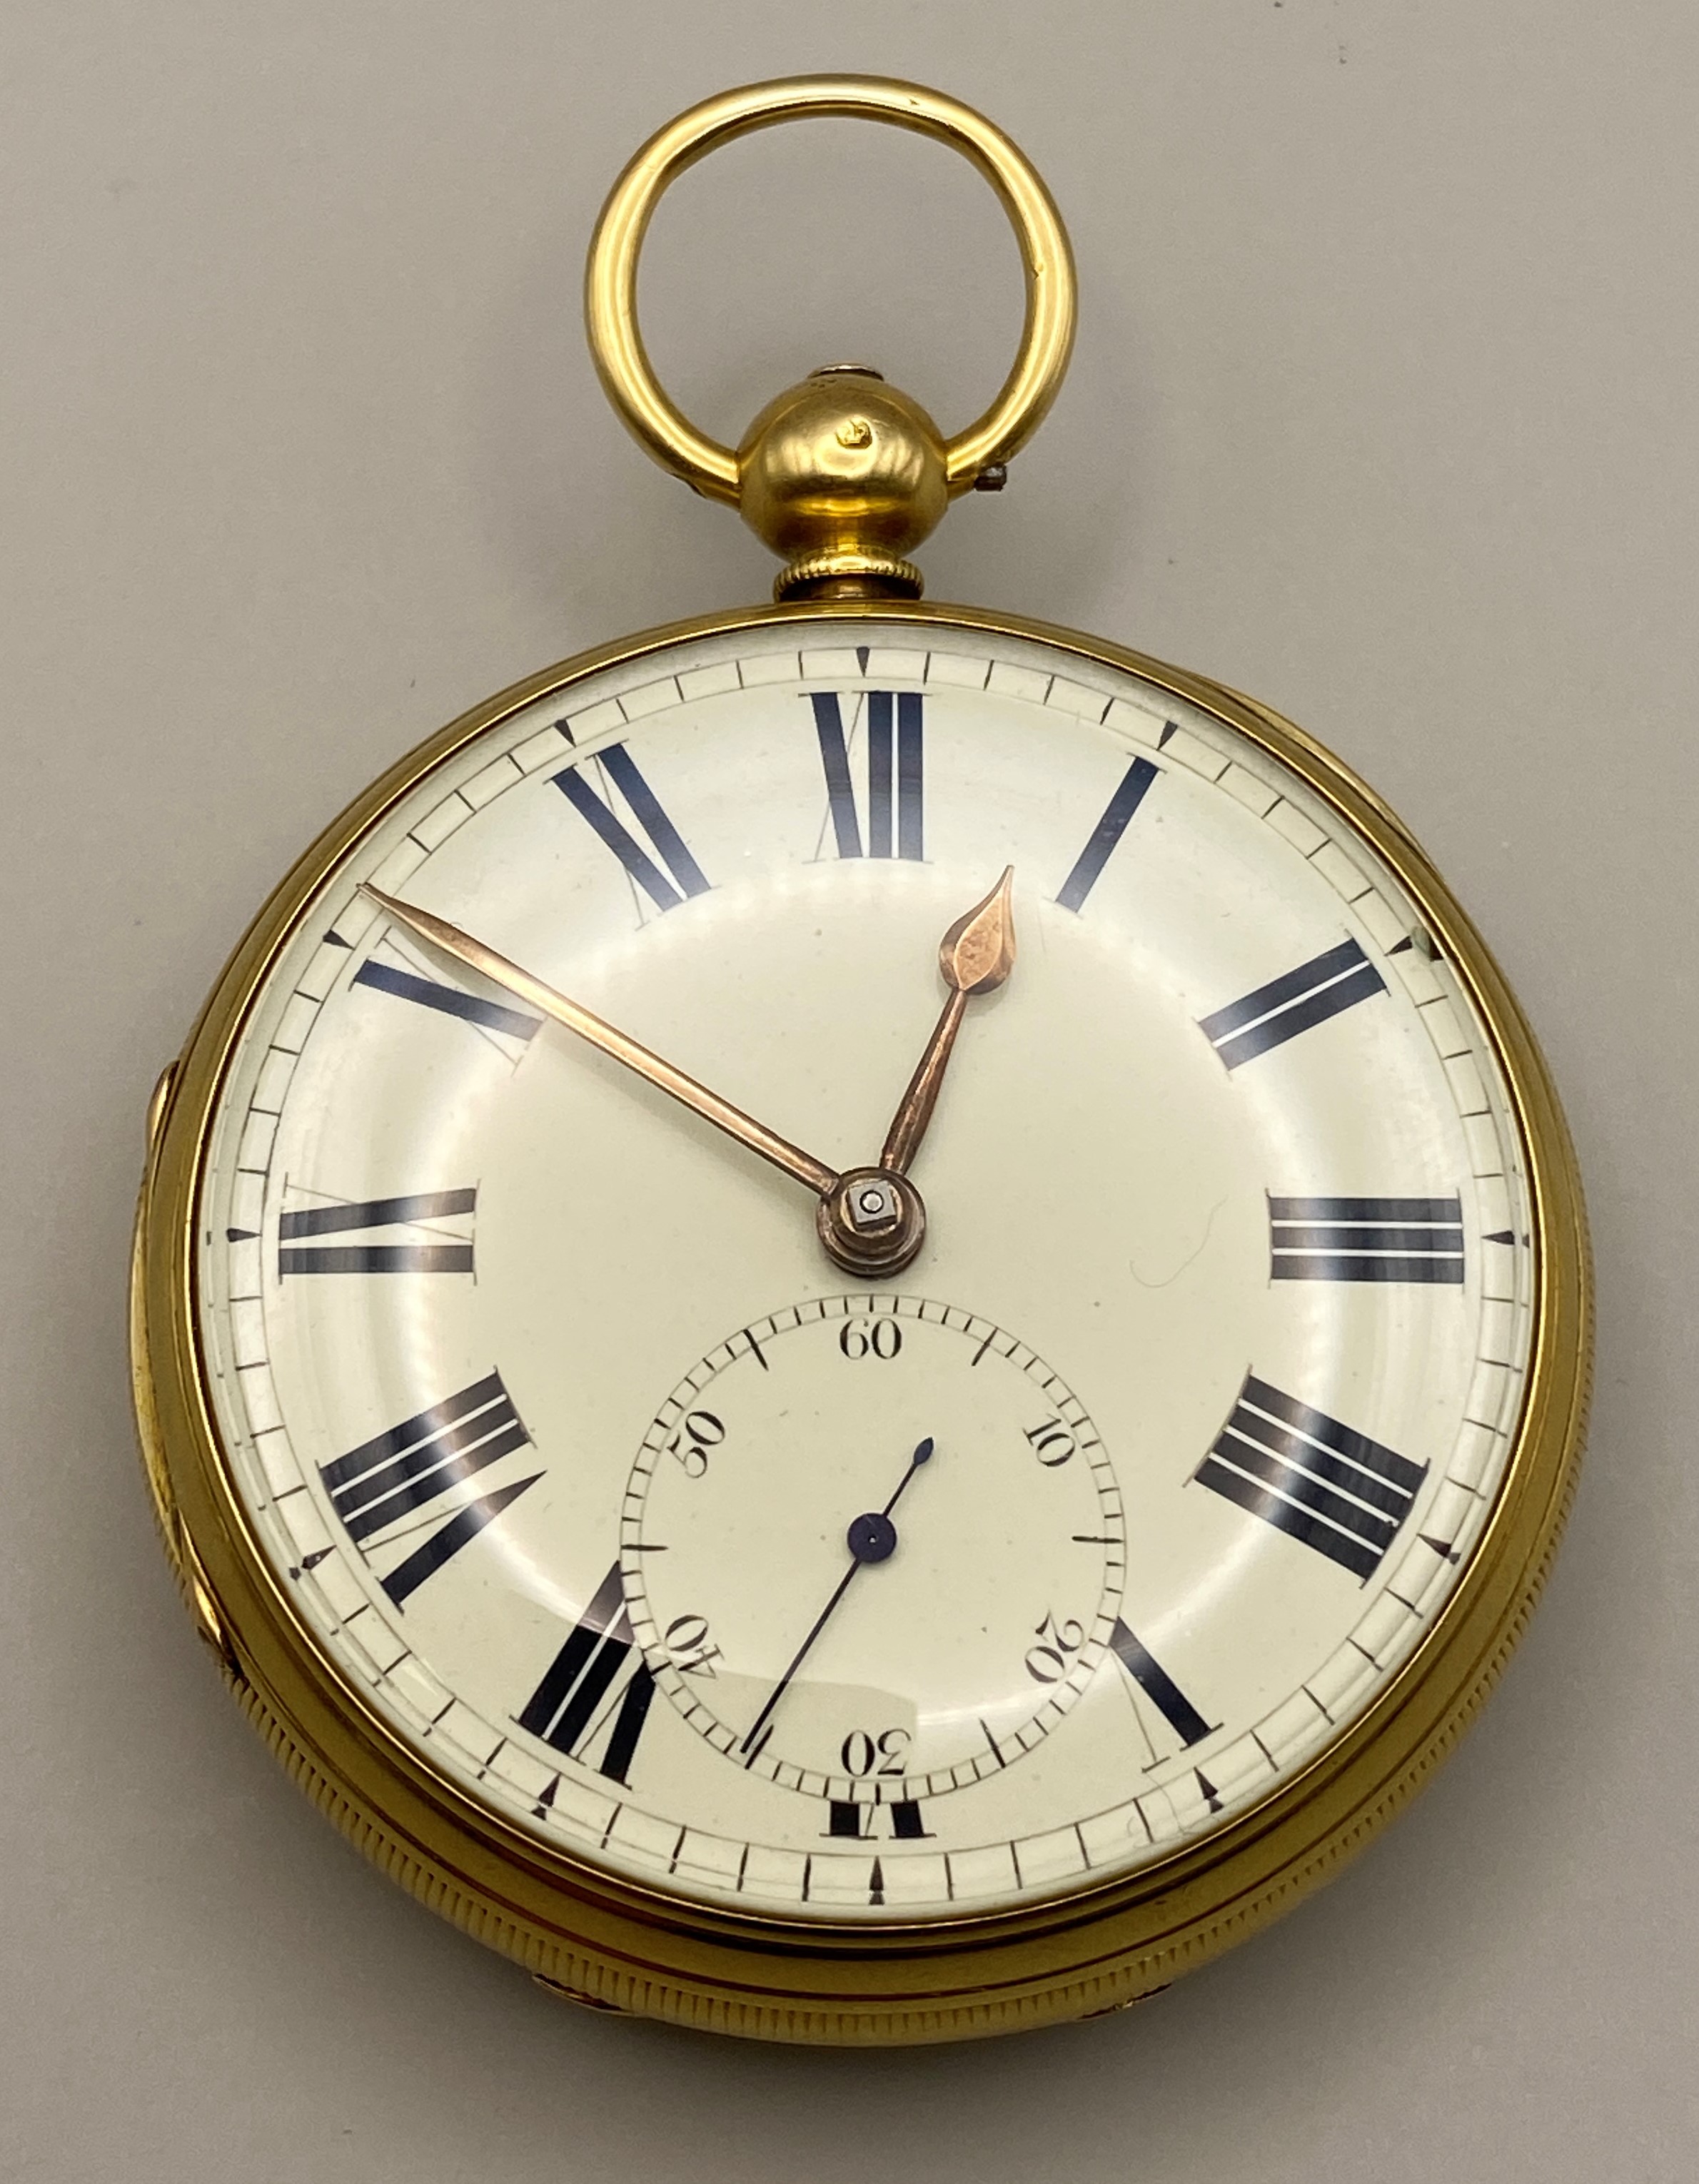 18ct Gold Fusee Pocket Watch by Gammon of Birmingham '1685', No.3584. - Image 2 of 48